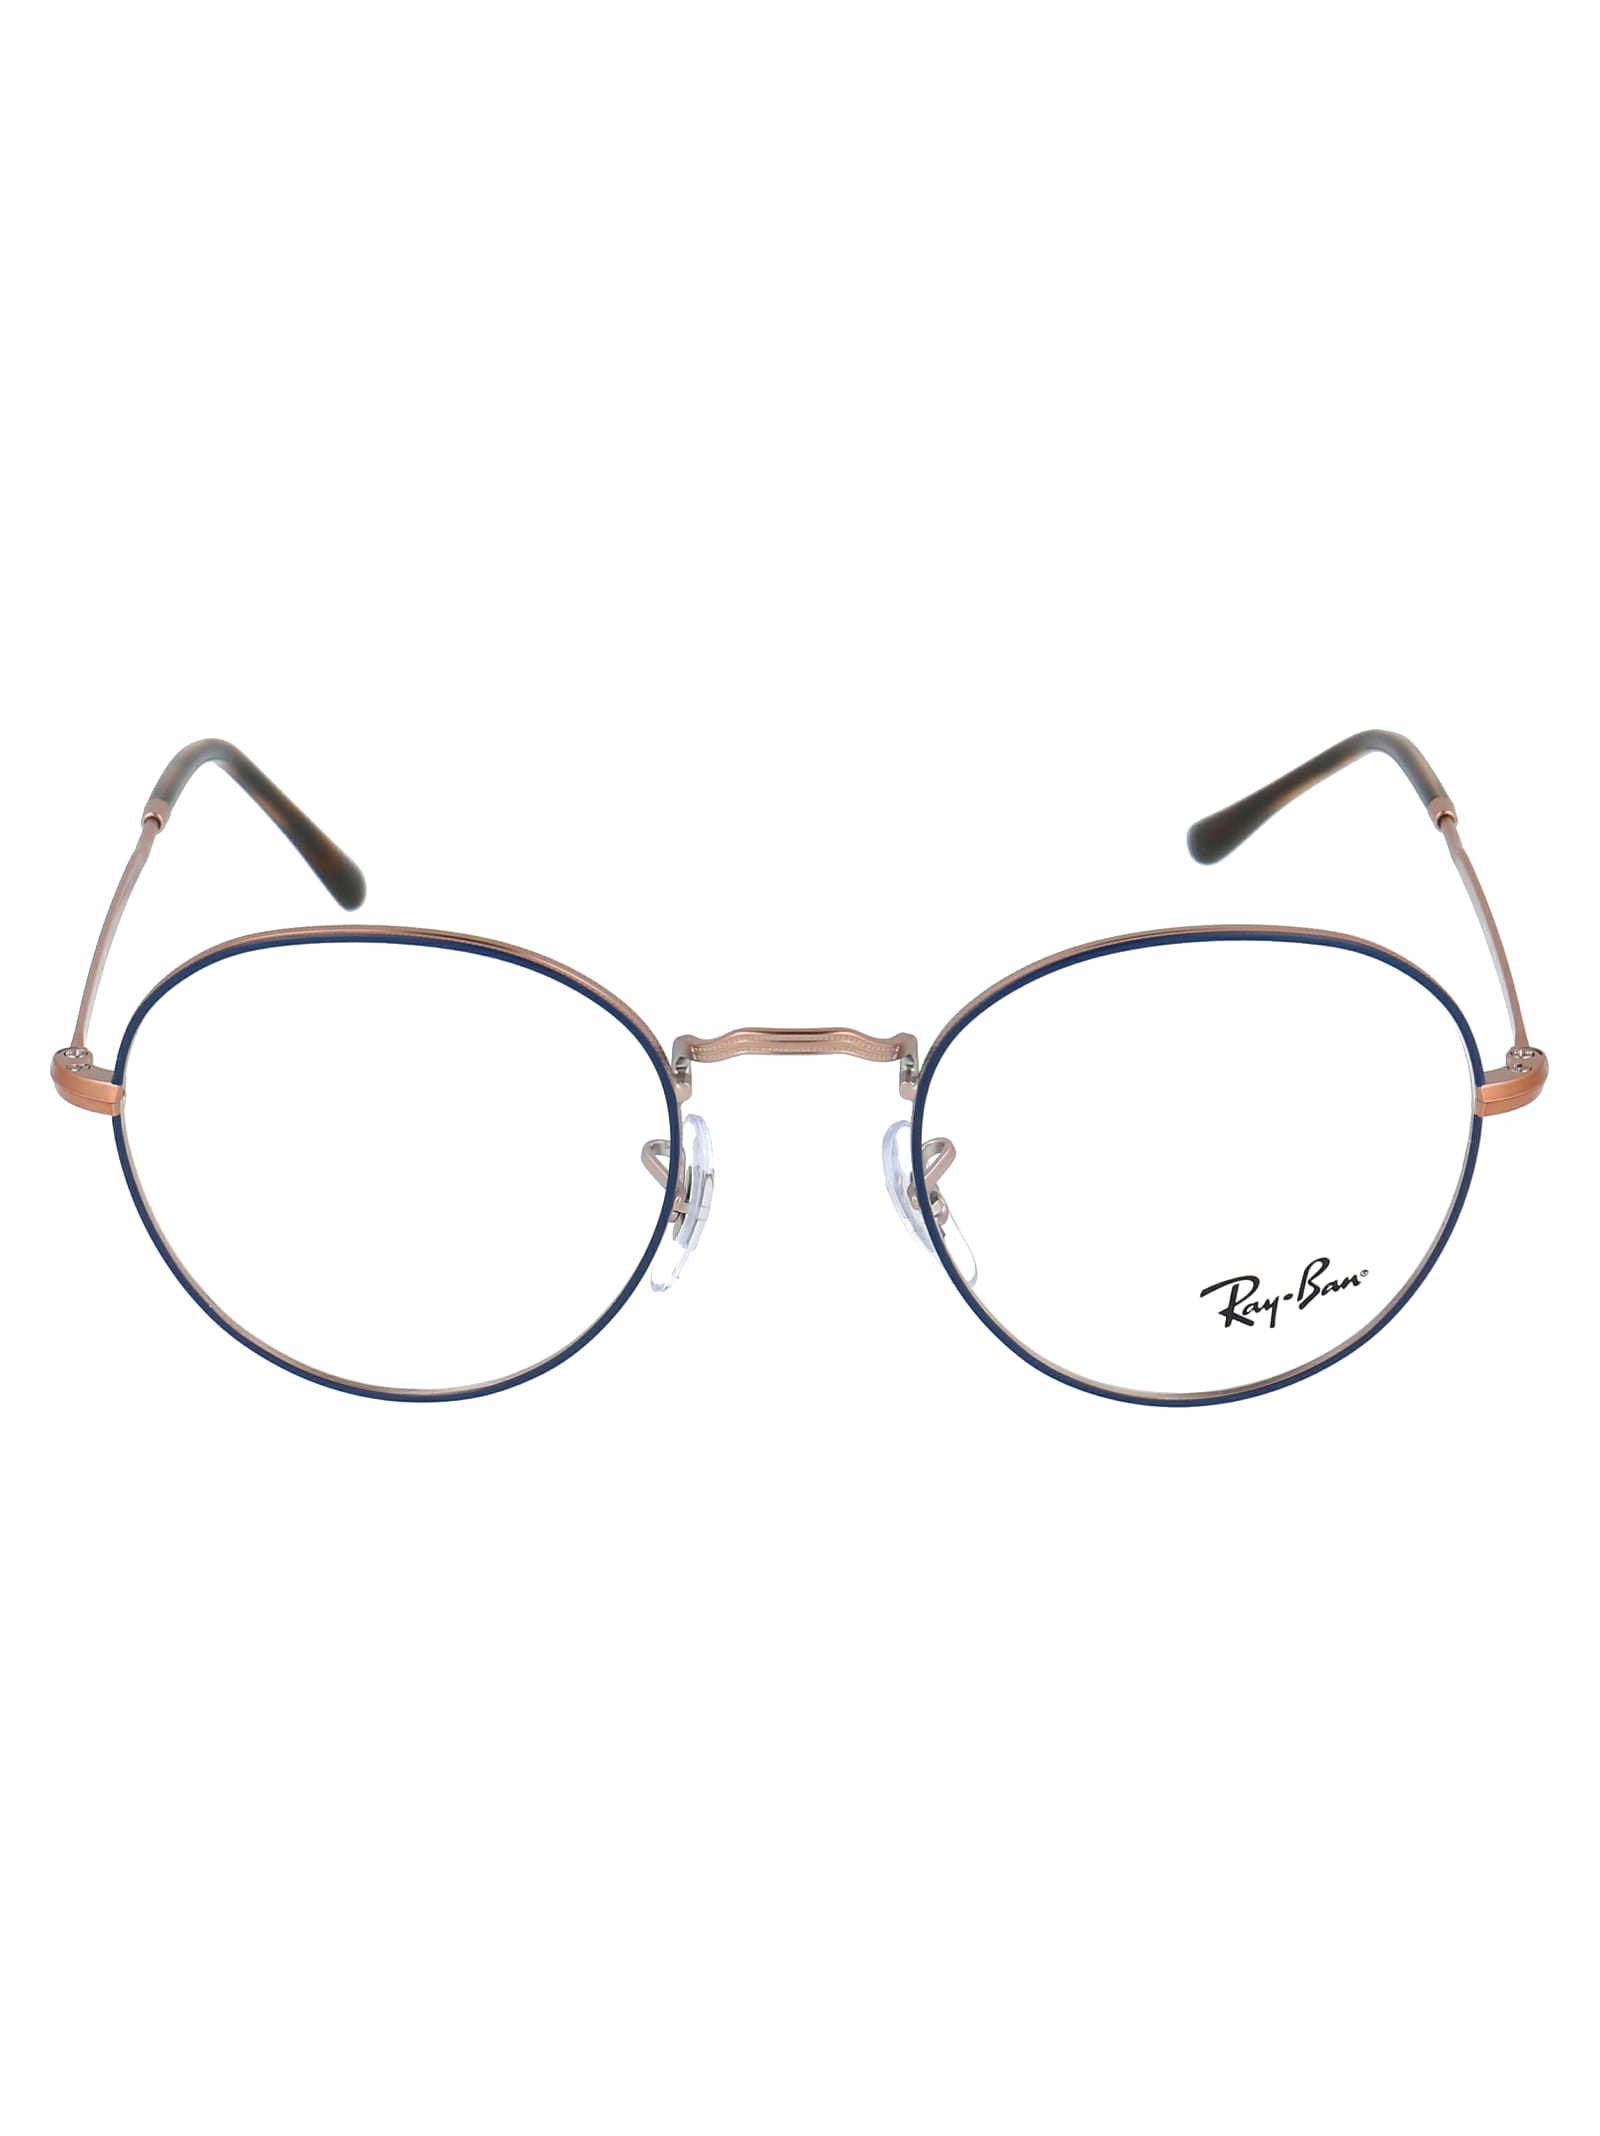 Ray Ban David Glasses In 3035 Blue On Matte Copper